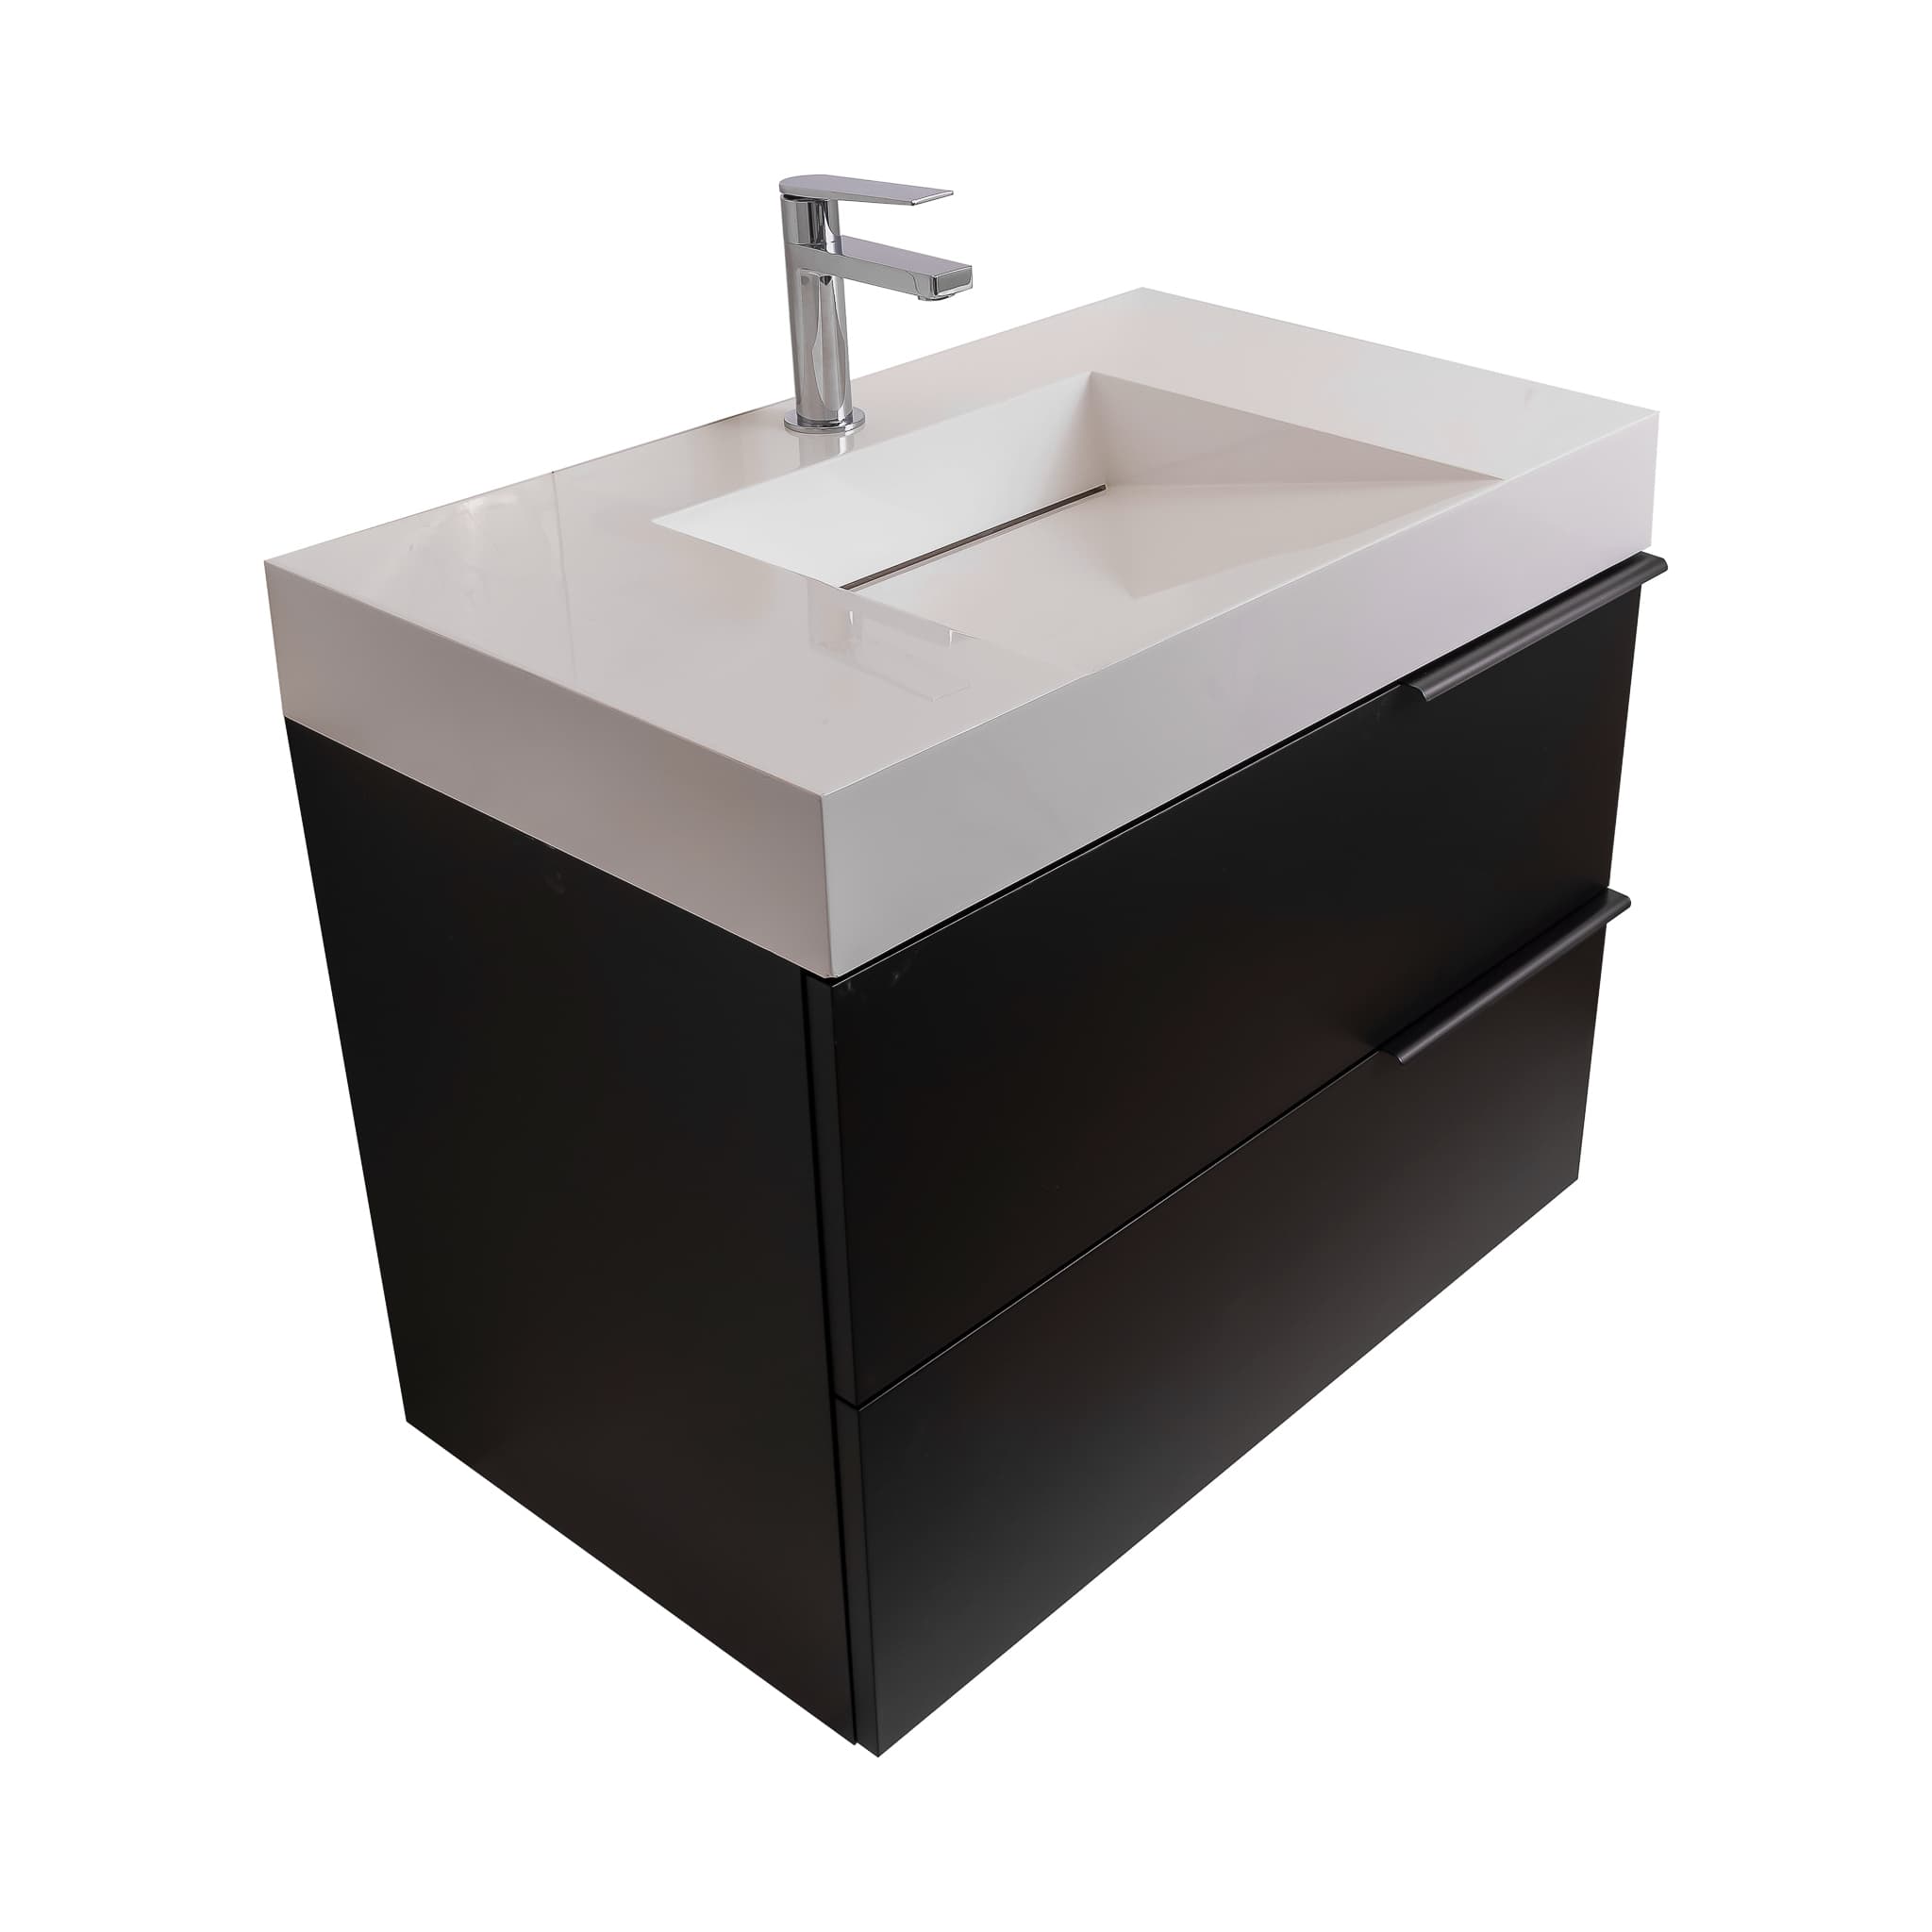 Mallorca 39.5 Matte Black Cabinet, Infinity Cultured Marble Sink, Wall Mounted Modern Vanity Set